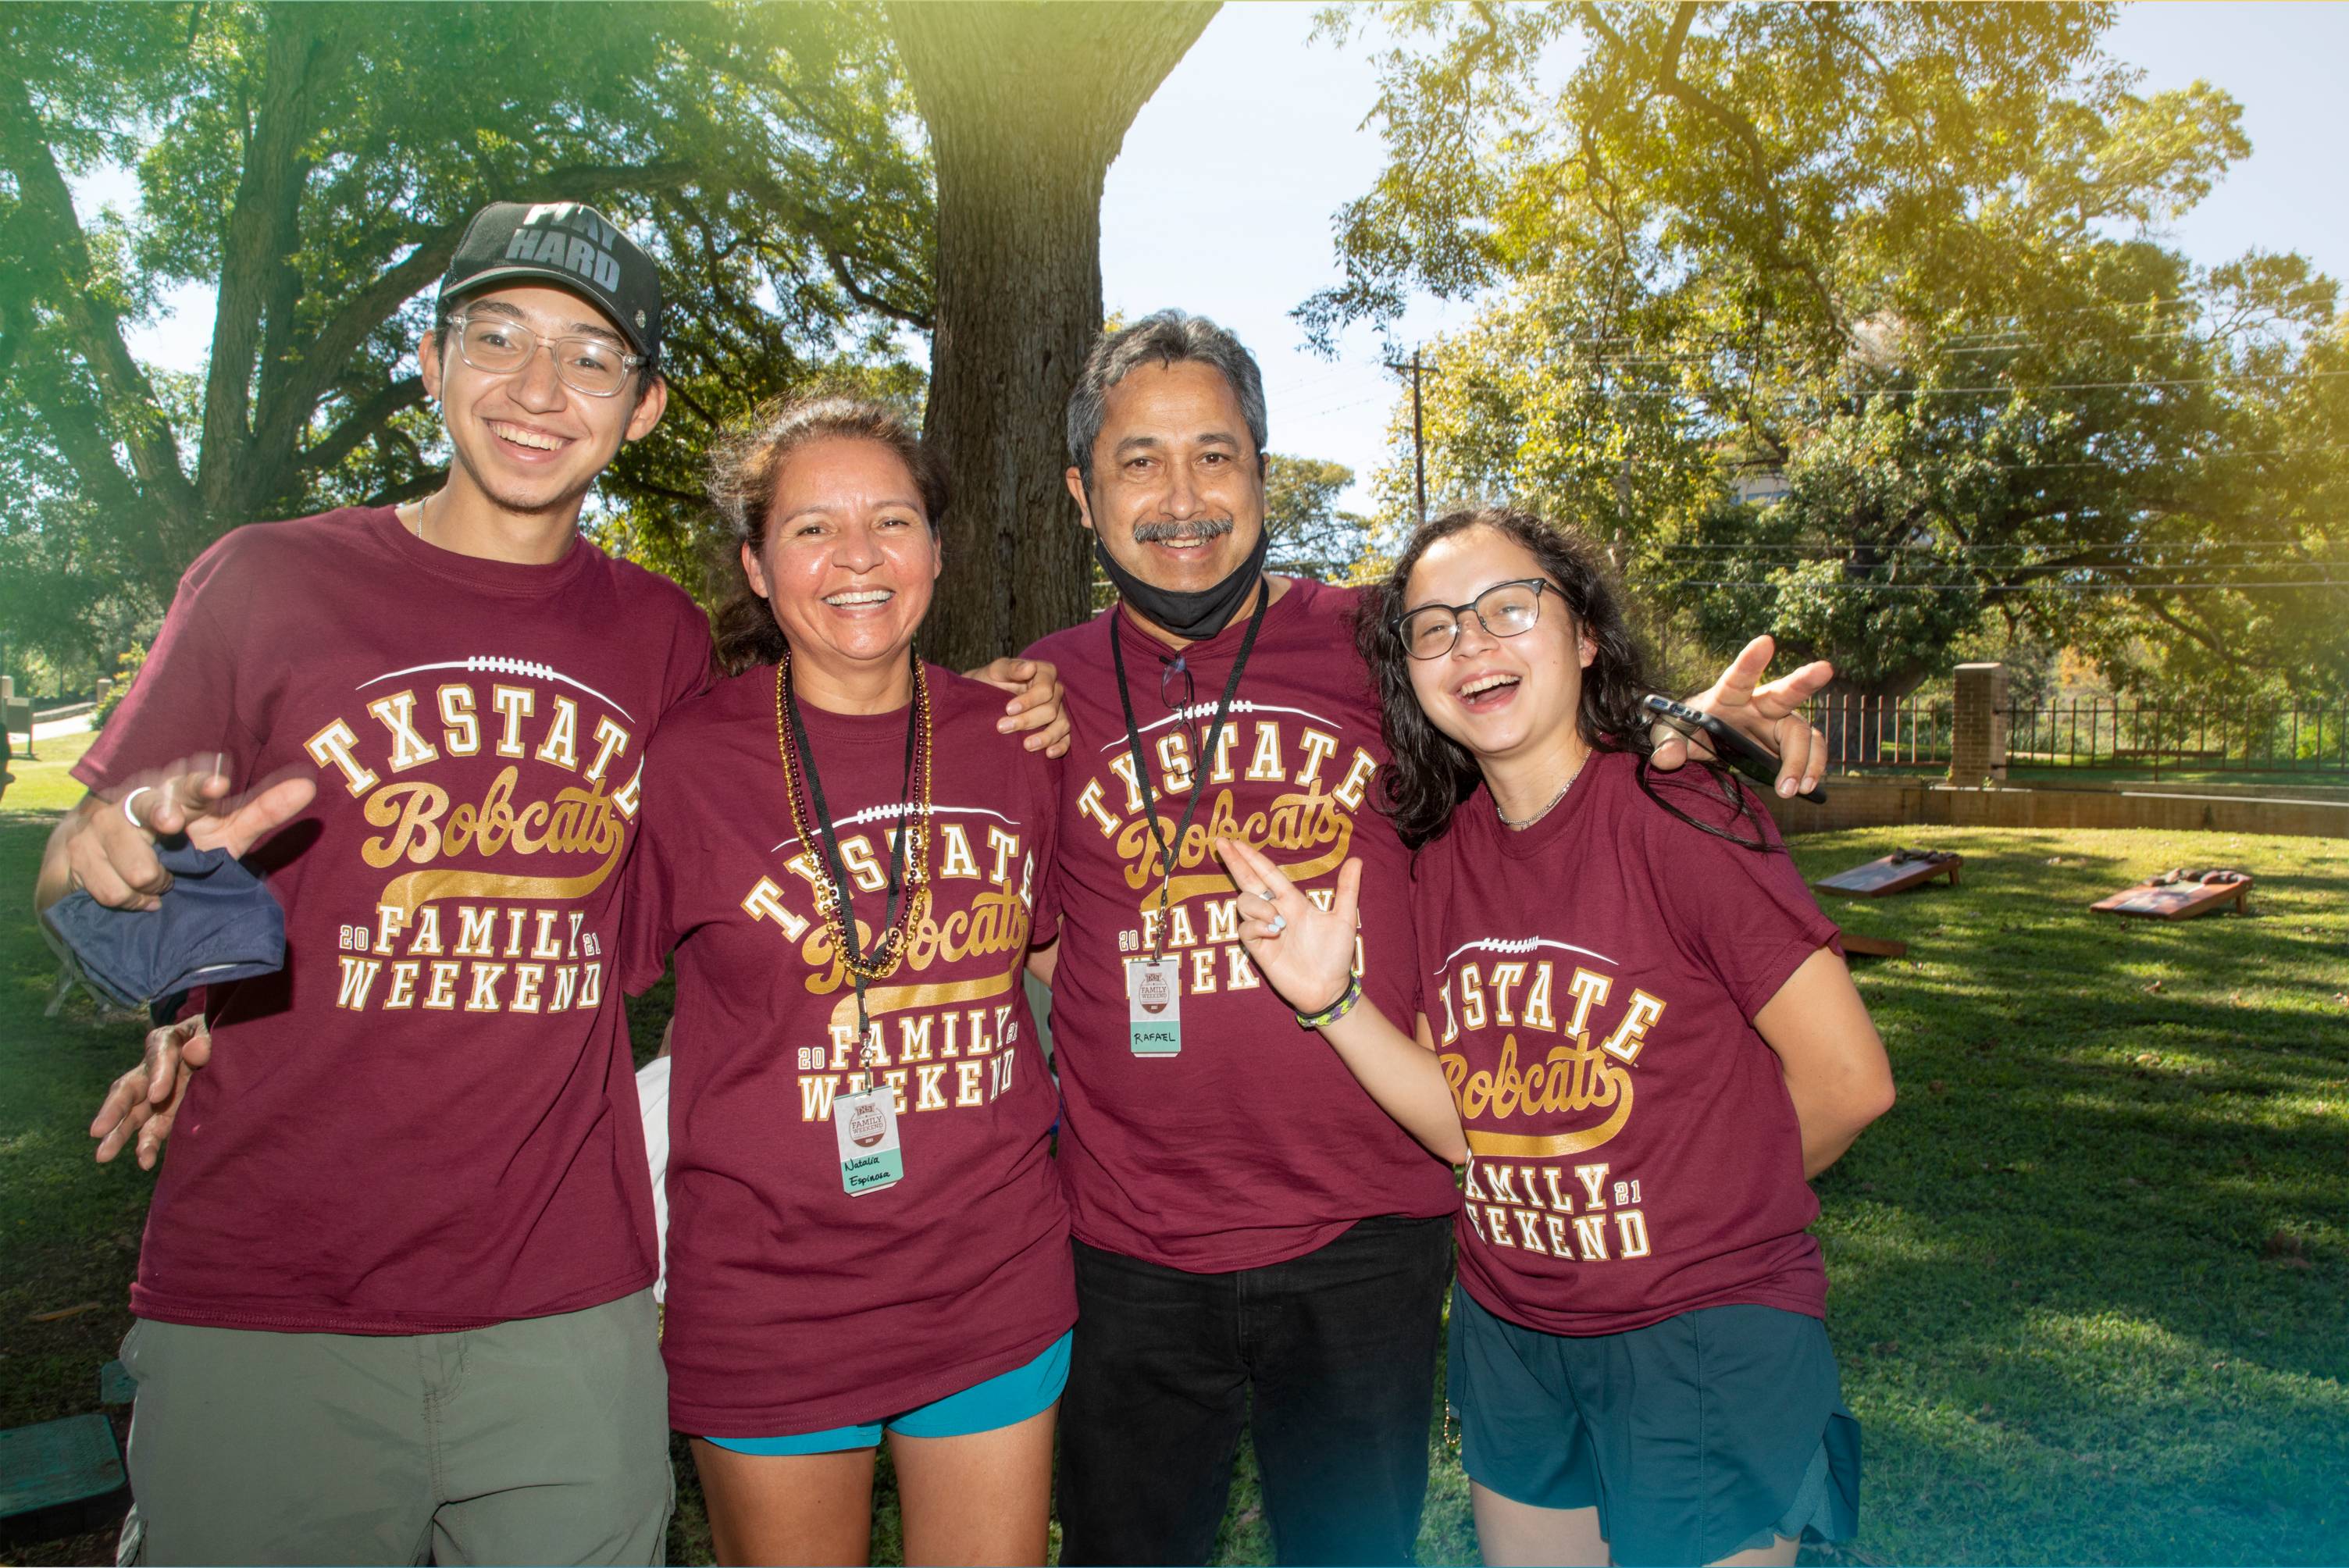 A family at Family Weekend last year